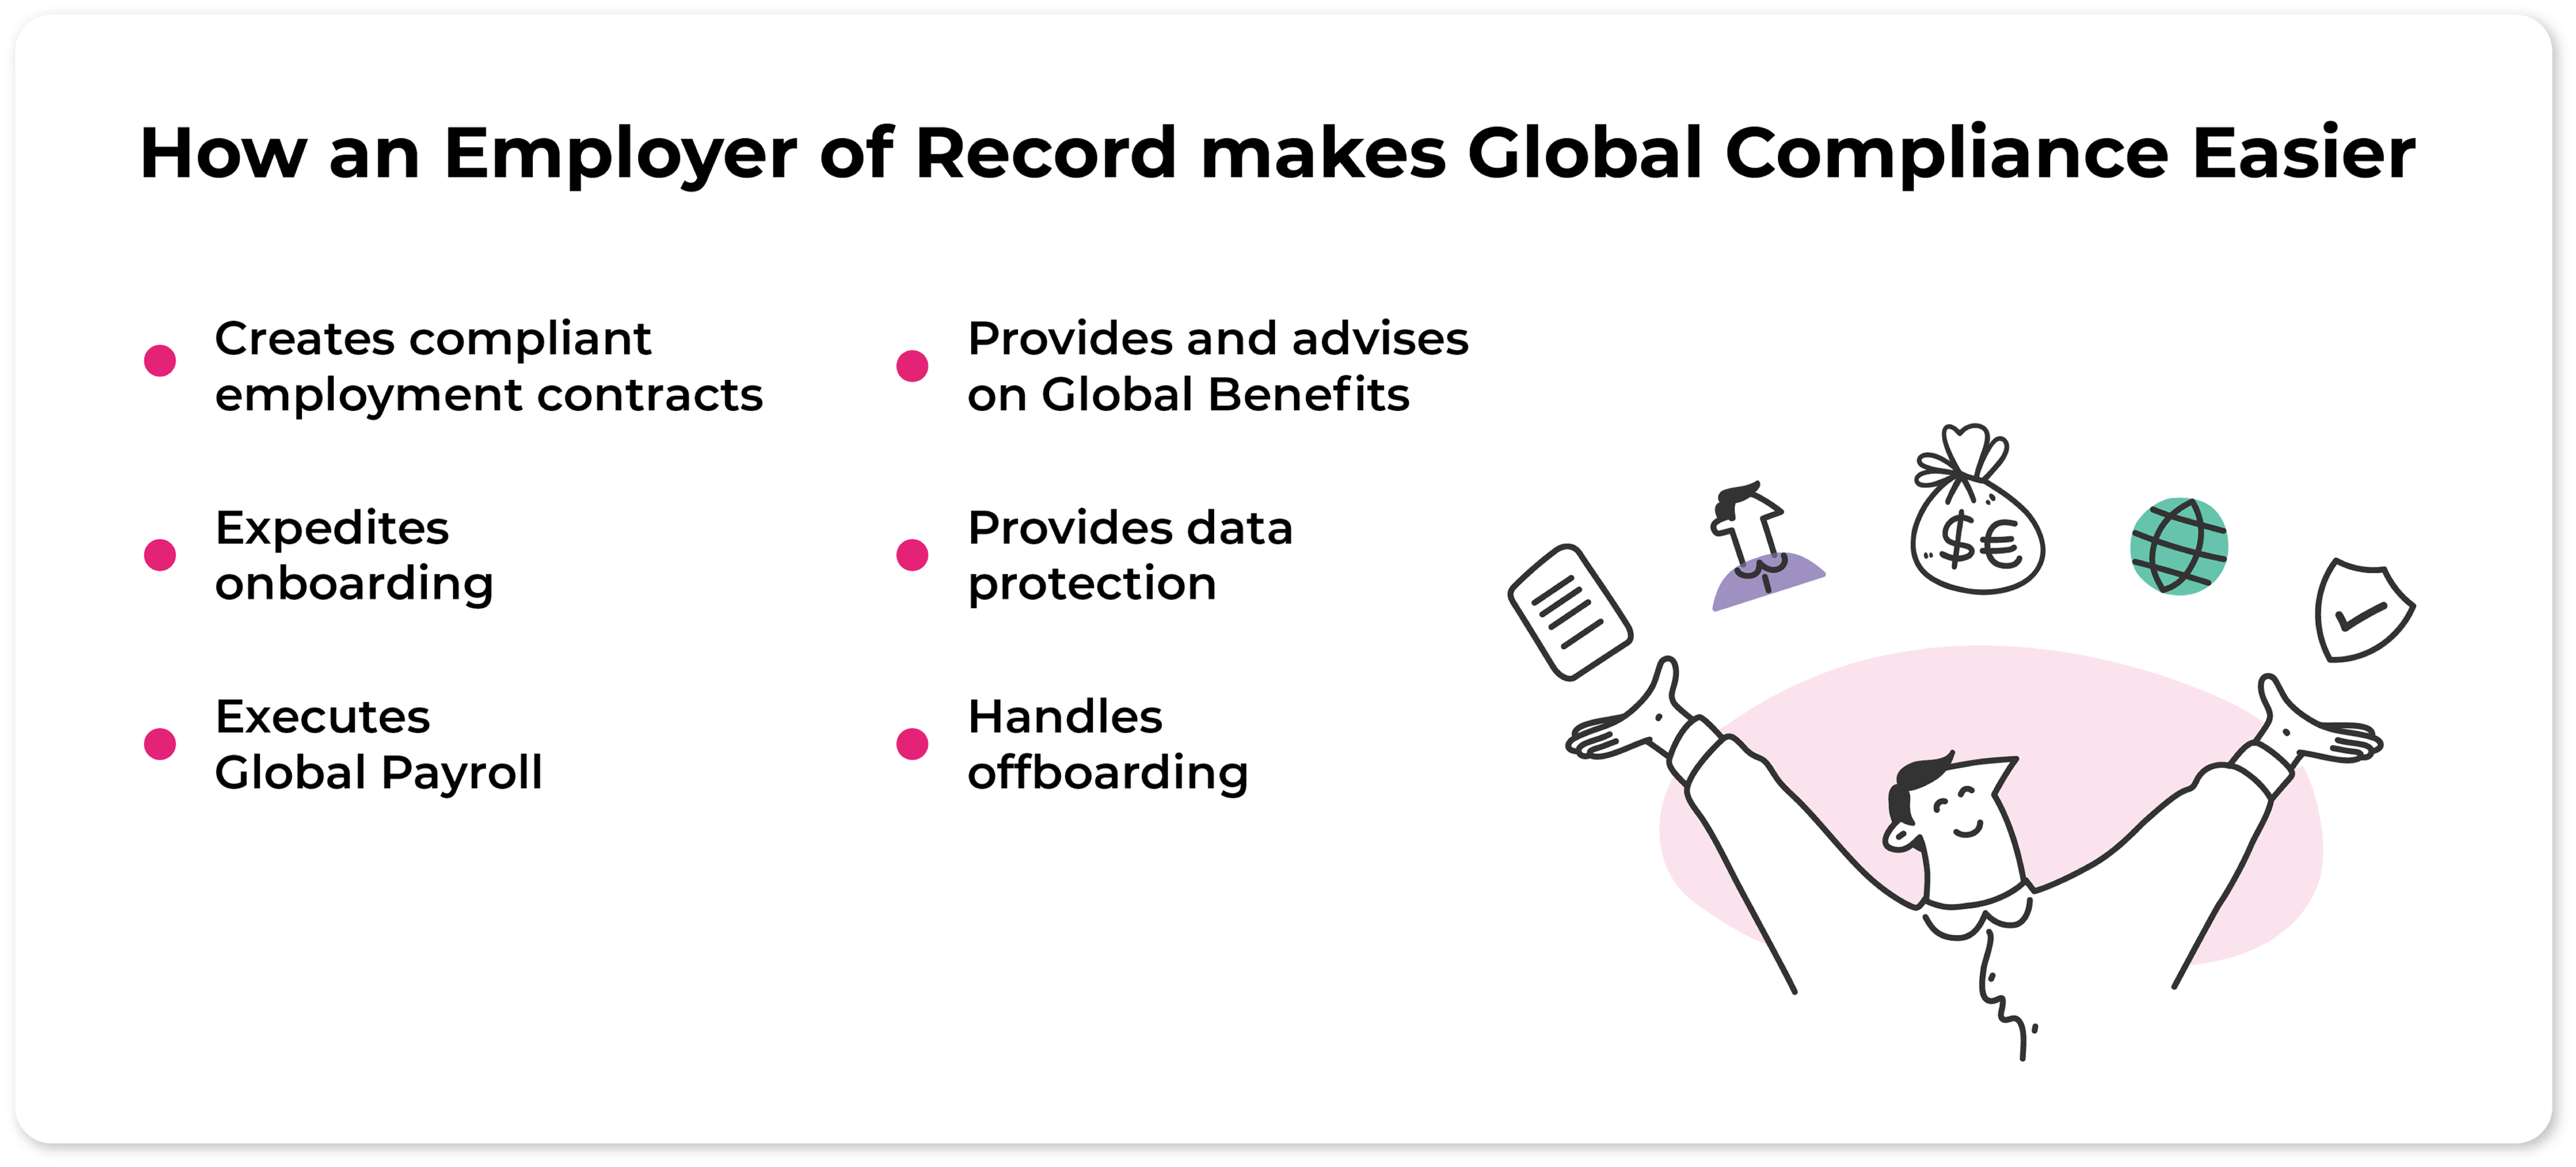 Employer of Record services make global compliance easier.